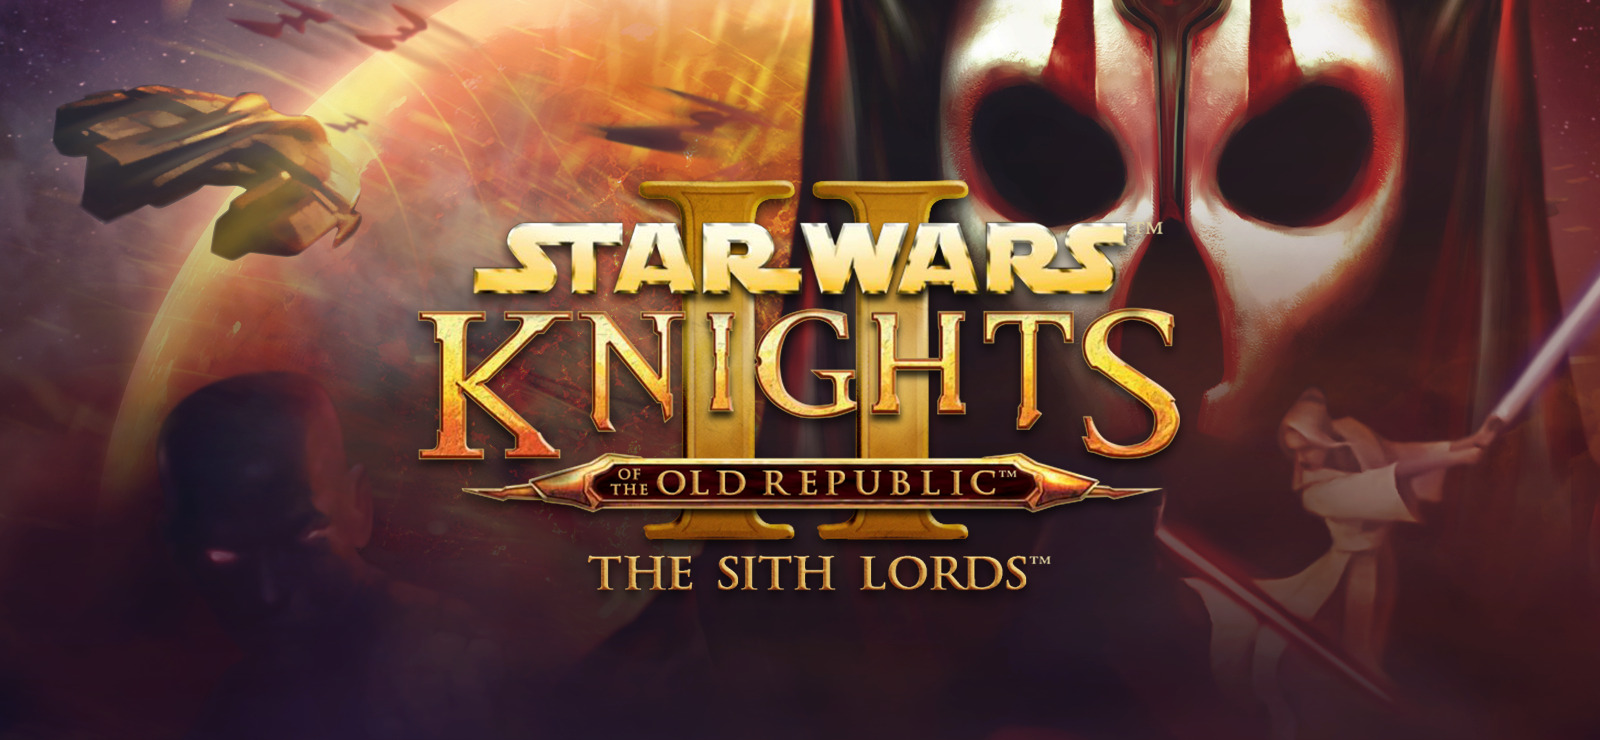 Star Wars: Knights of the Old Republic II – The Sith Lords (2004)